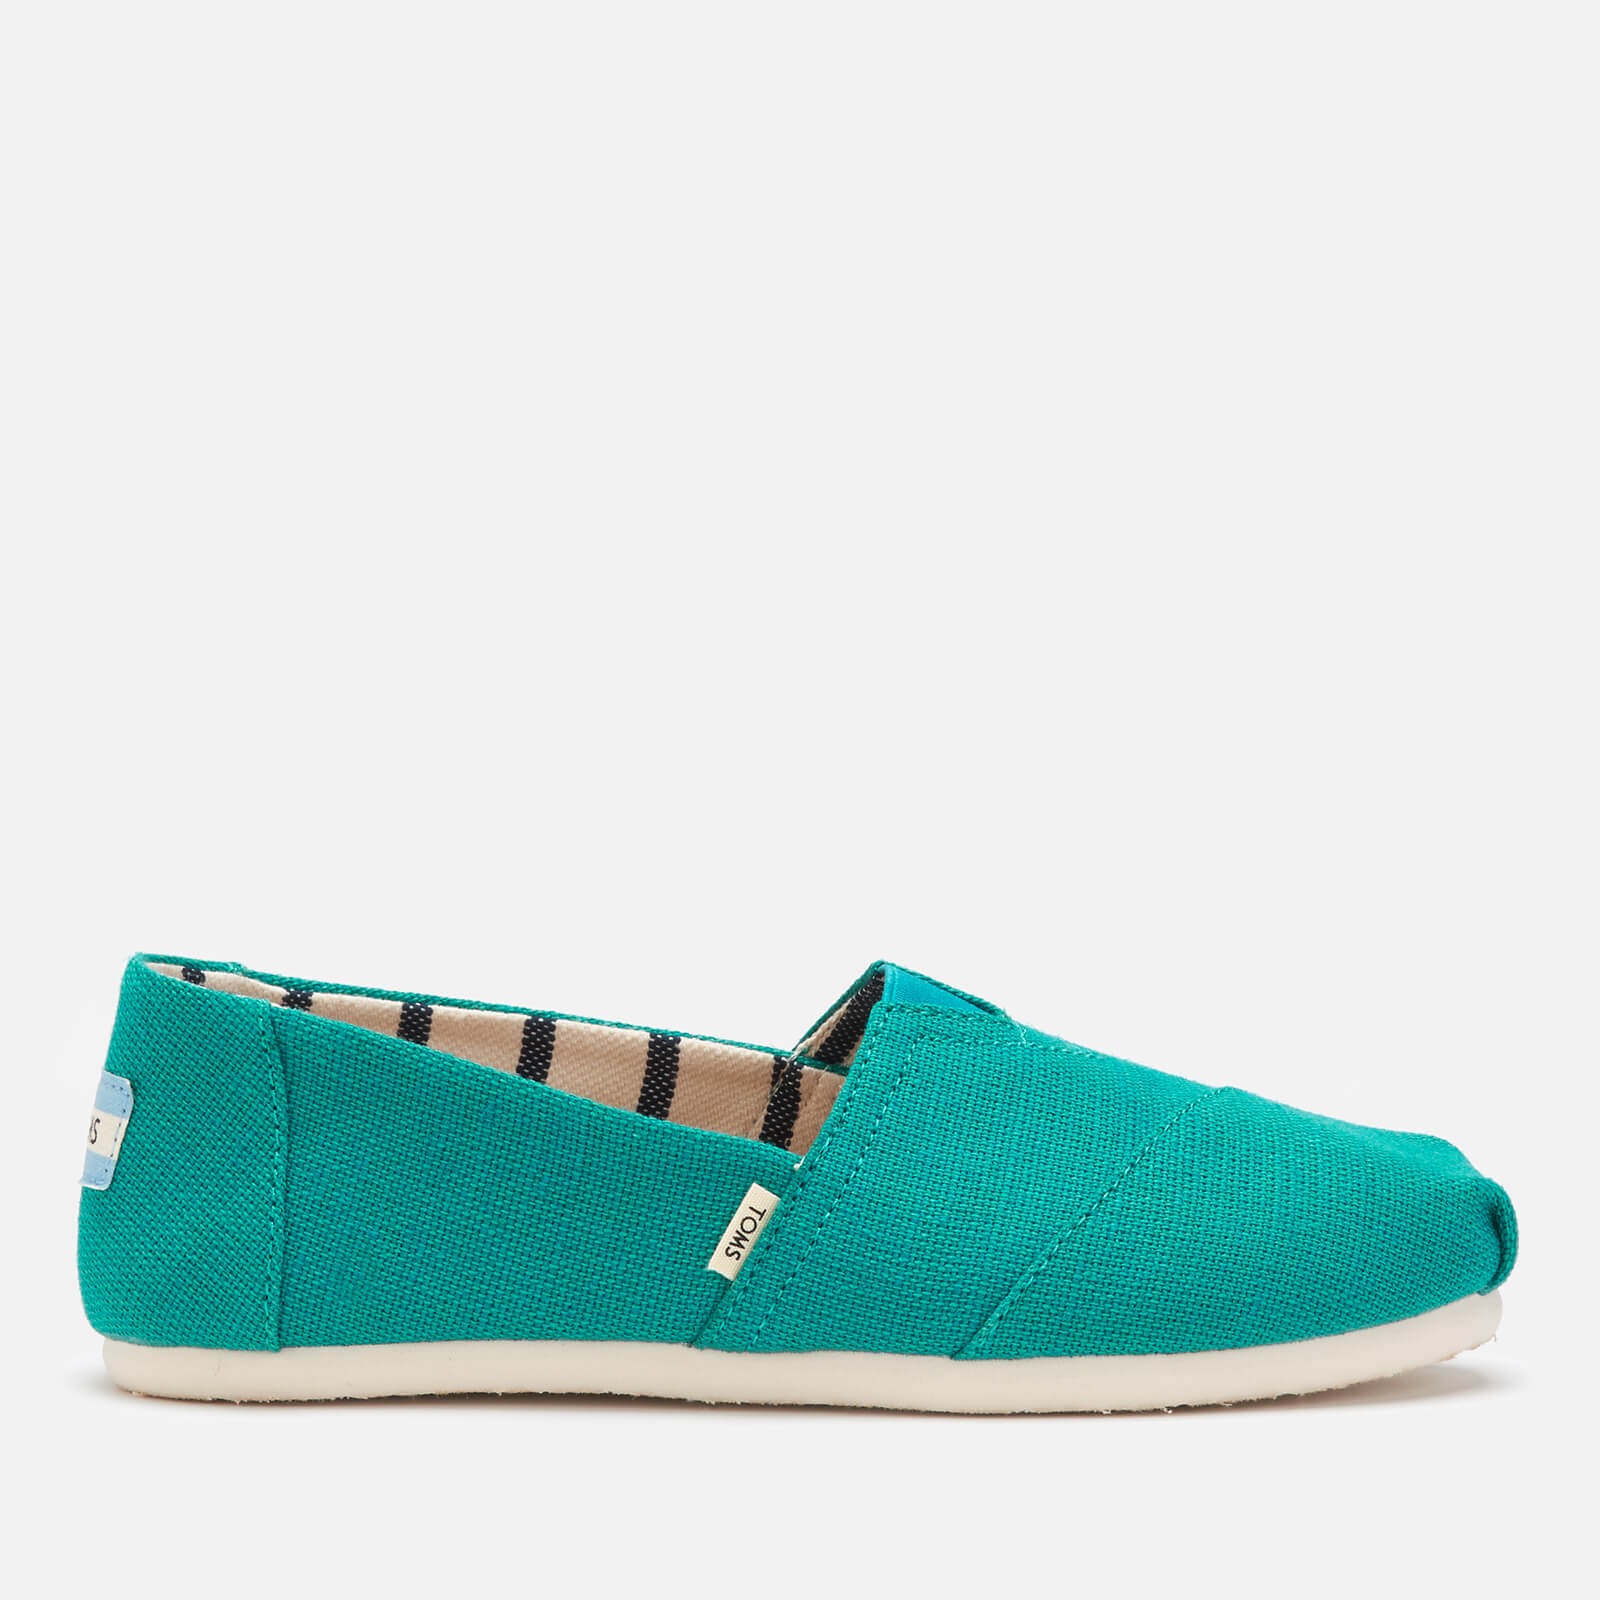 teal toms shoes